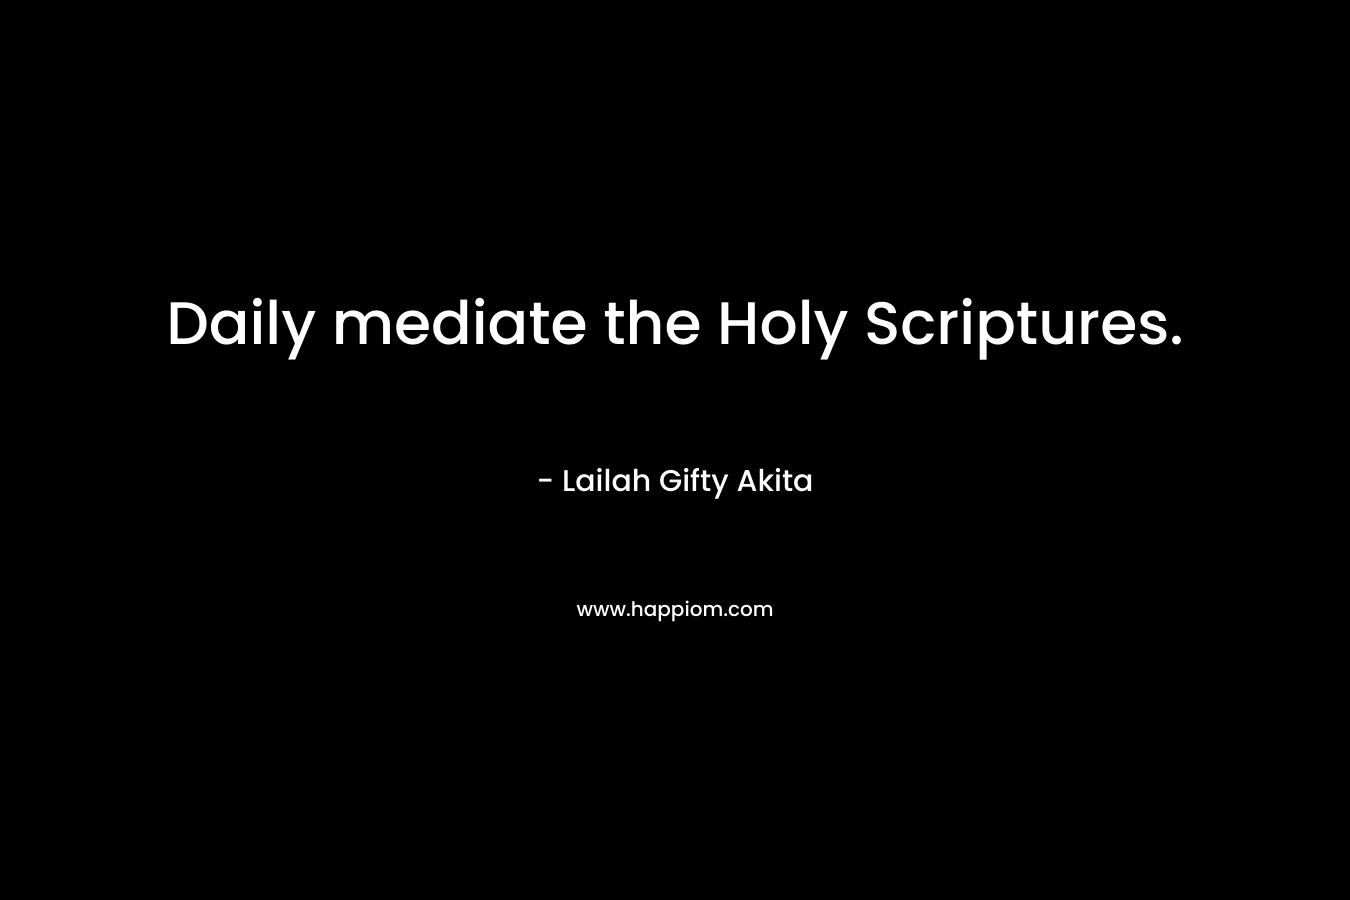 Daily mediate the Holy Scriptures.